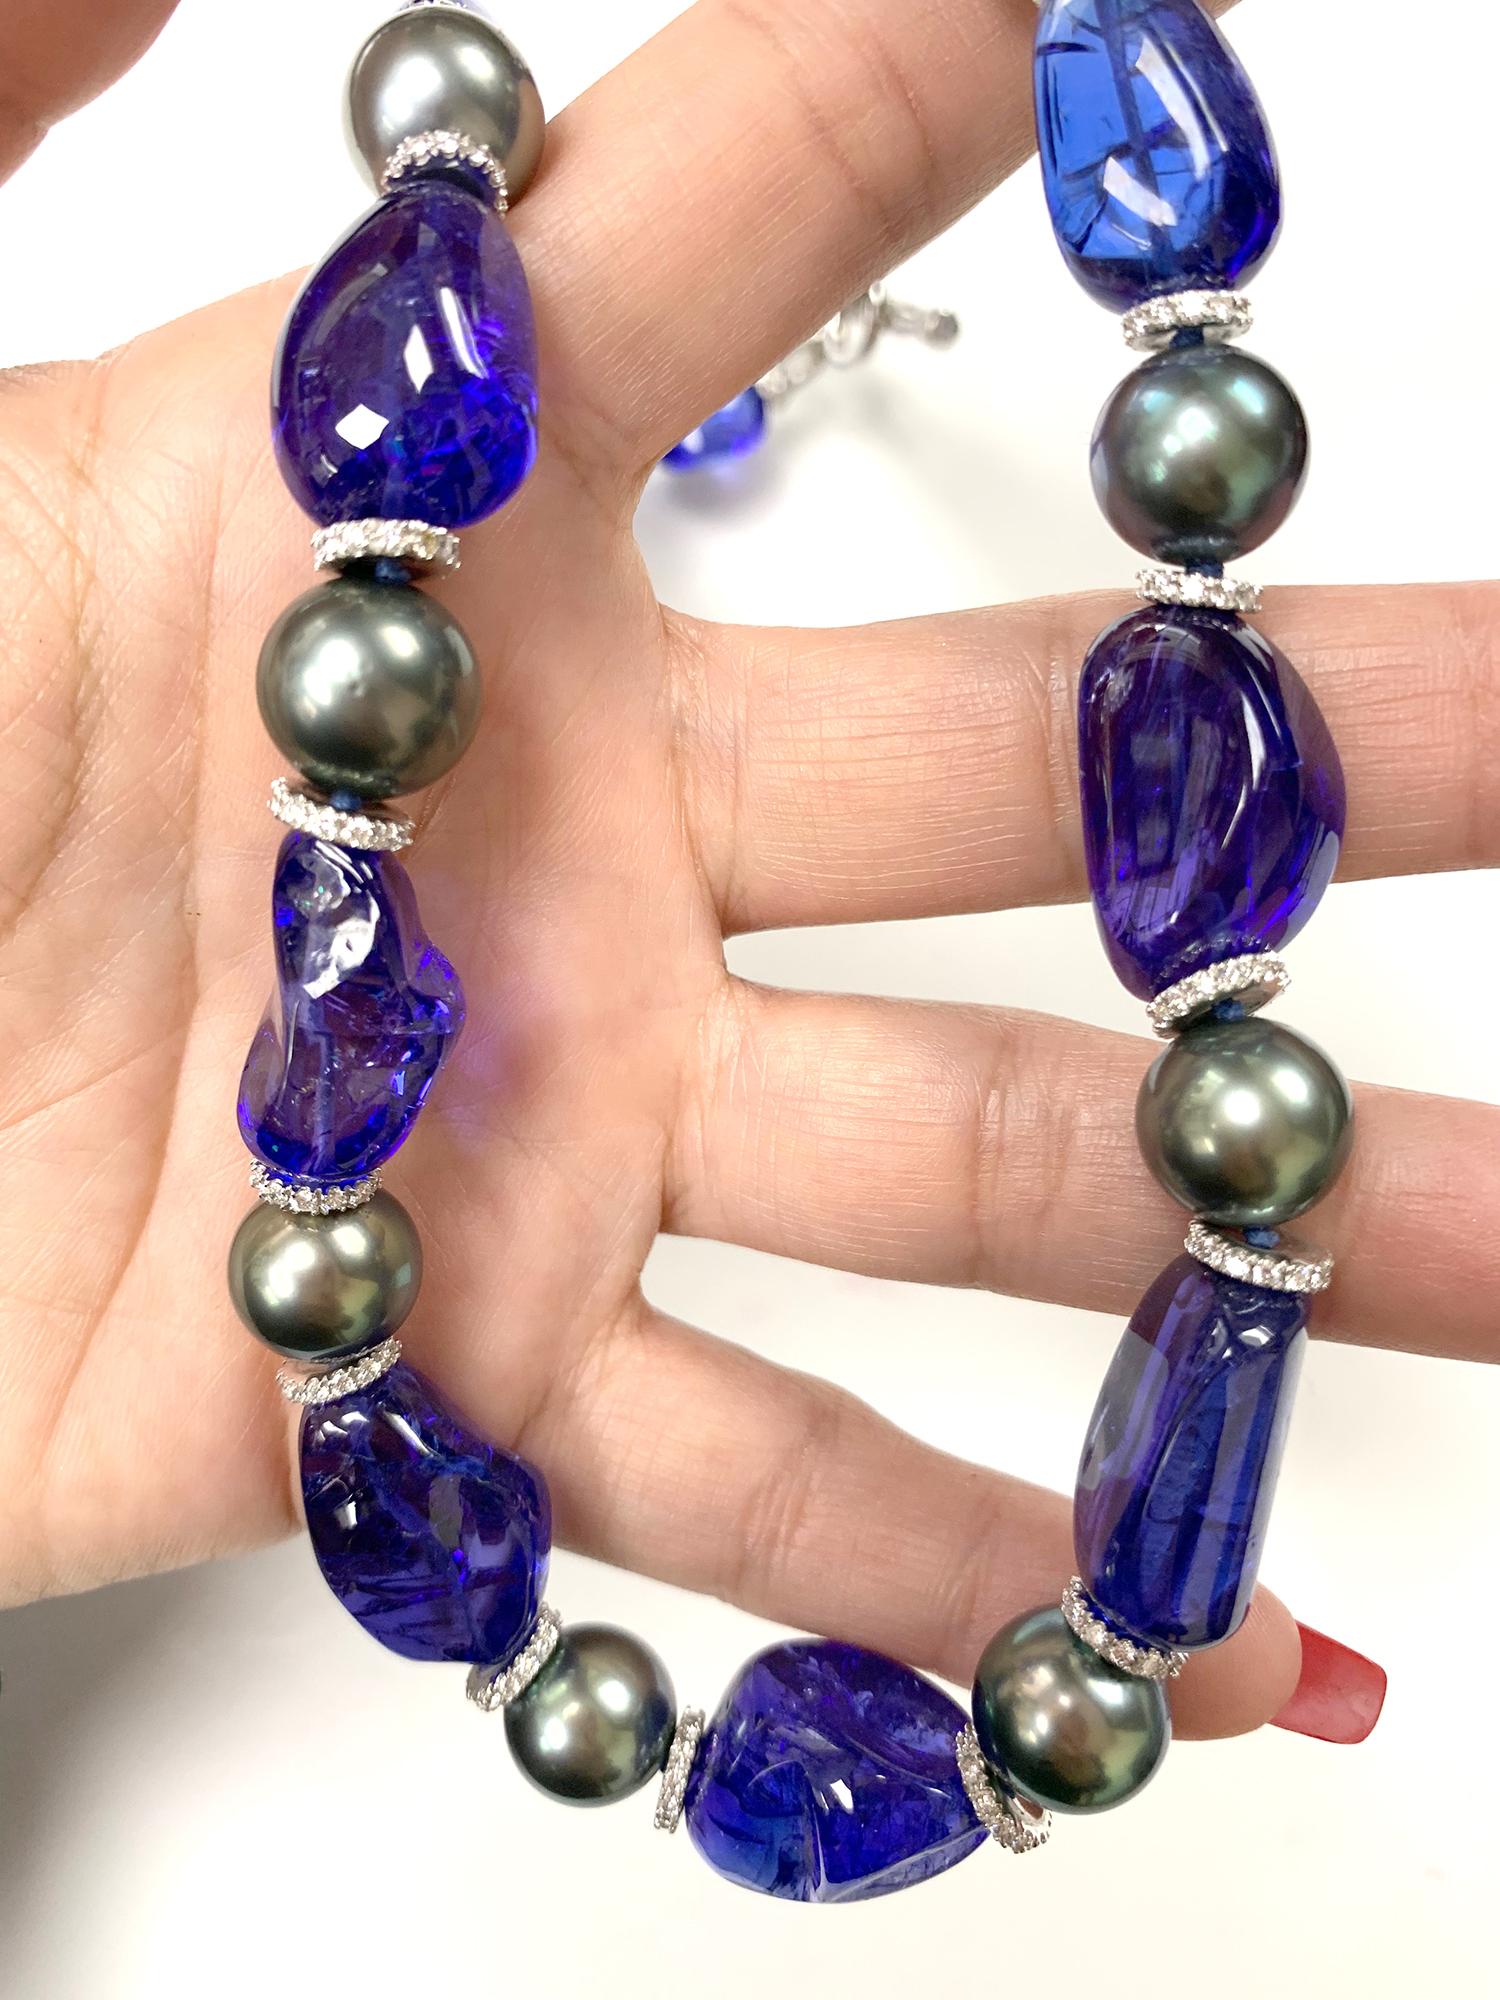 Cabochon Goshwara Tanzanite and South Sea Pearls with Diamond Rondelles Necklace For Sale